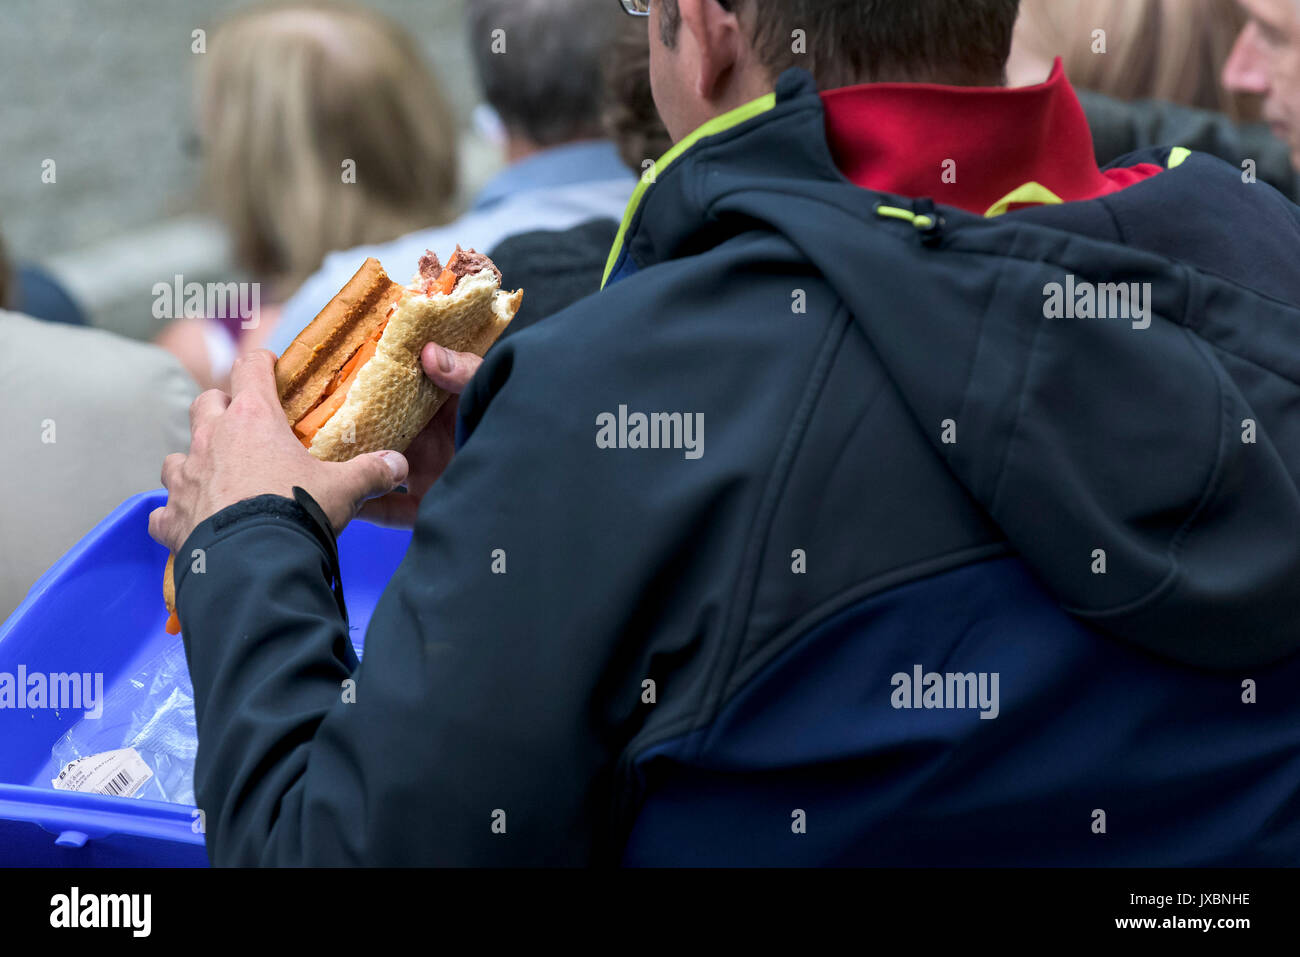 A man eating a large filled baguette. Stock Photo